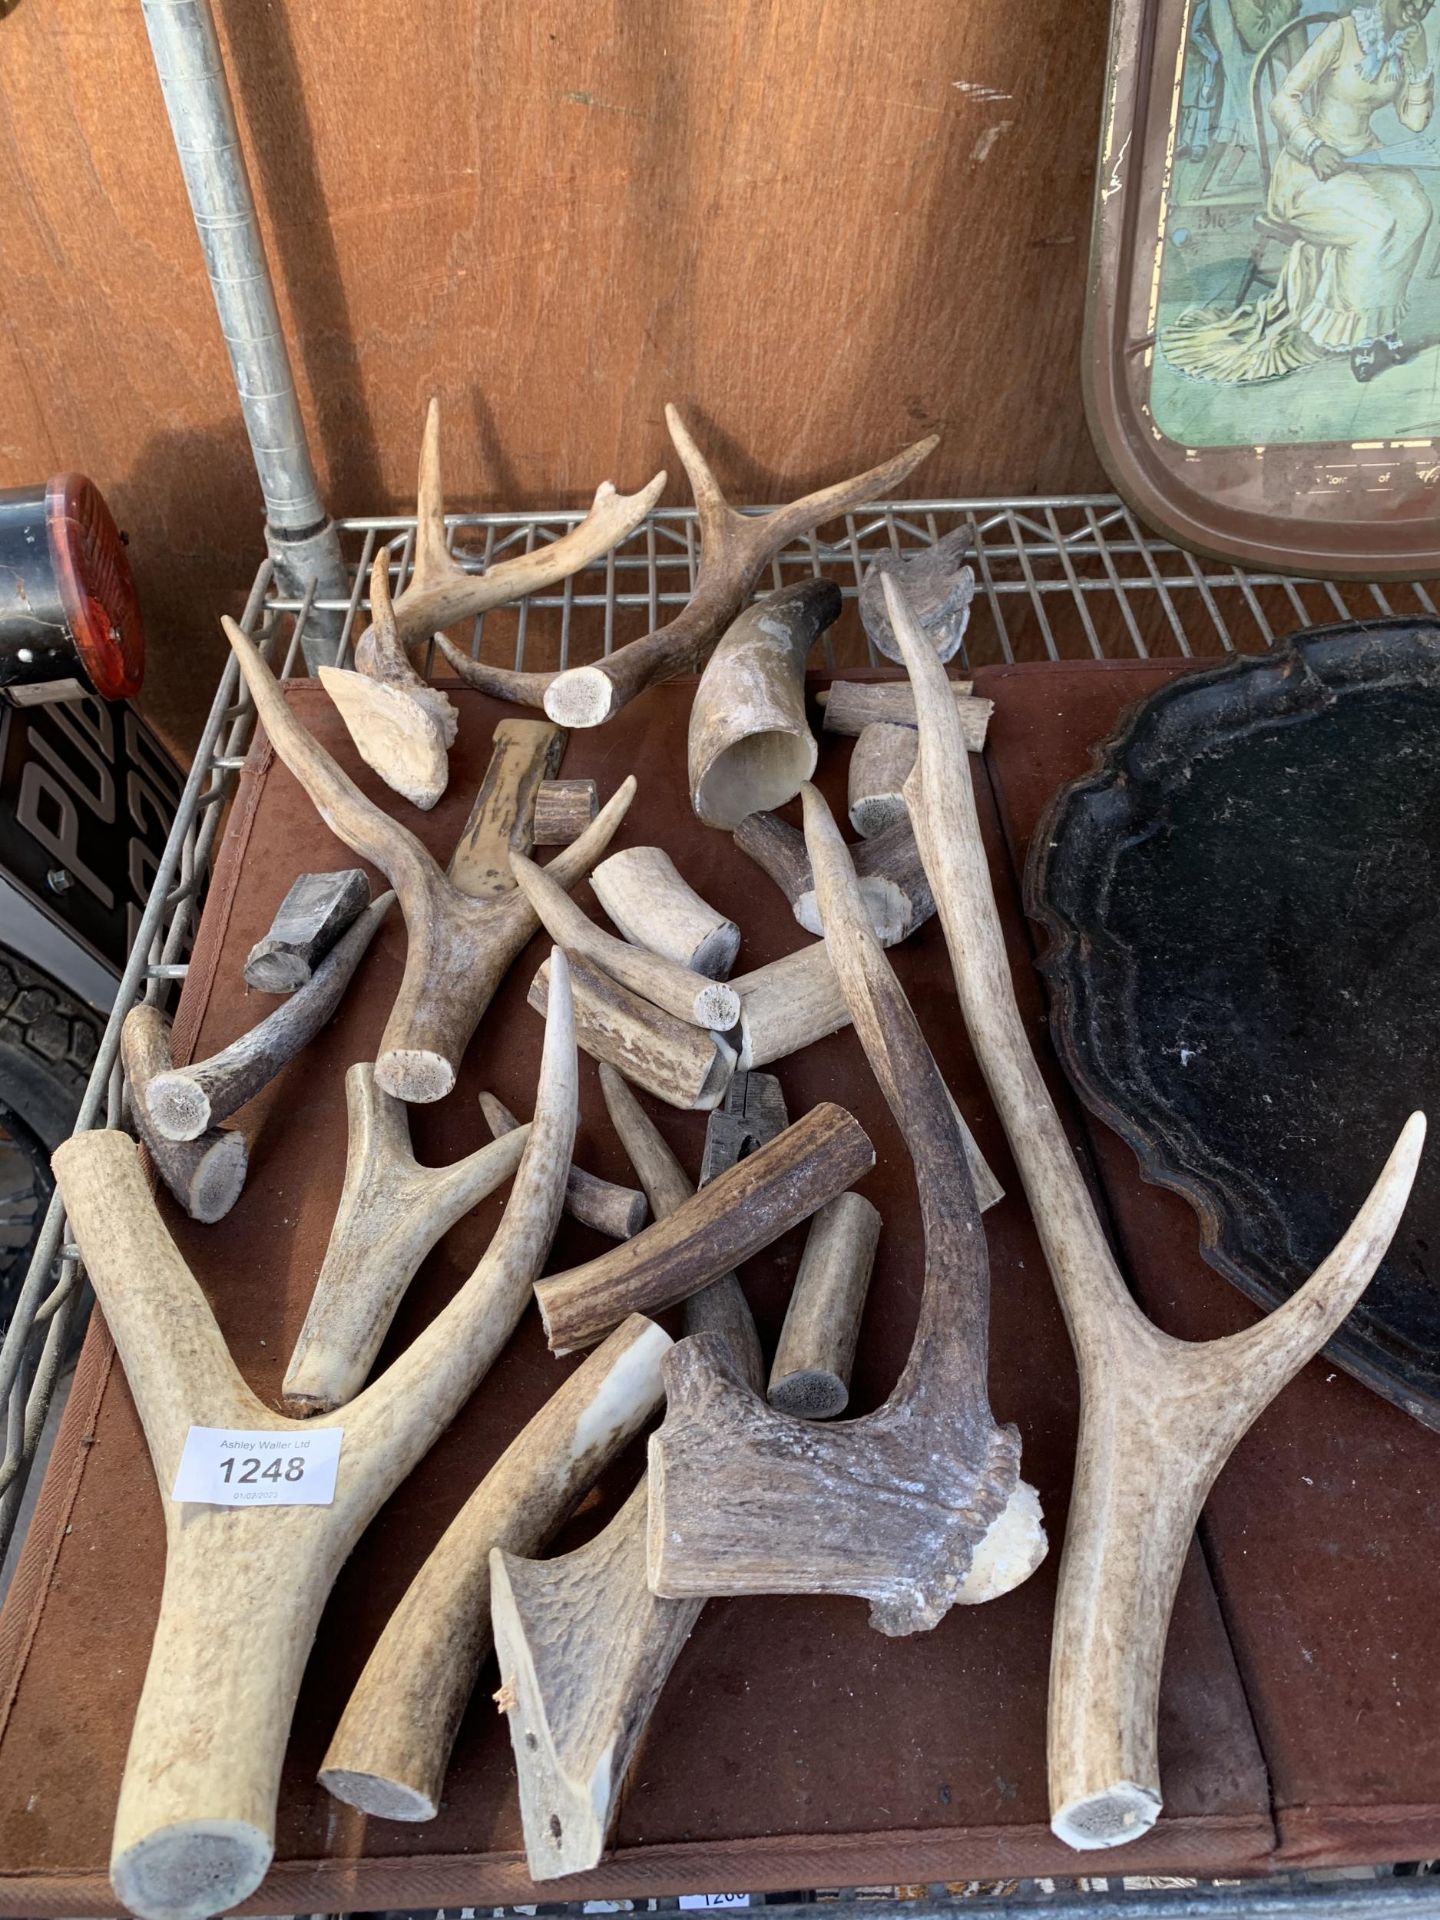 A LARGE ASSORTMENT OF STICK AND WHISTLE MAKING HORN AND ANTLER